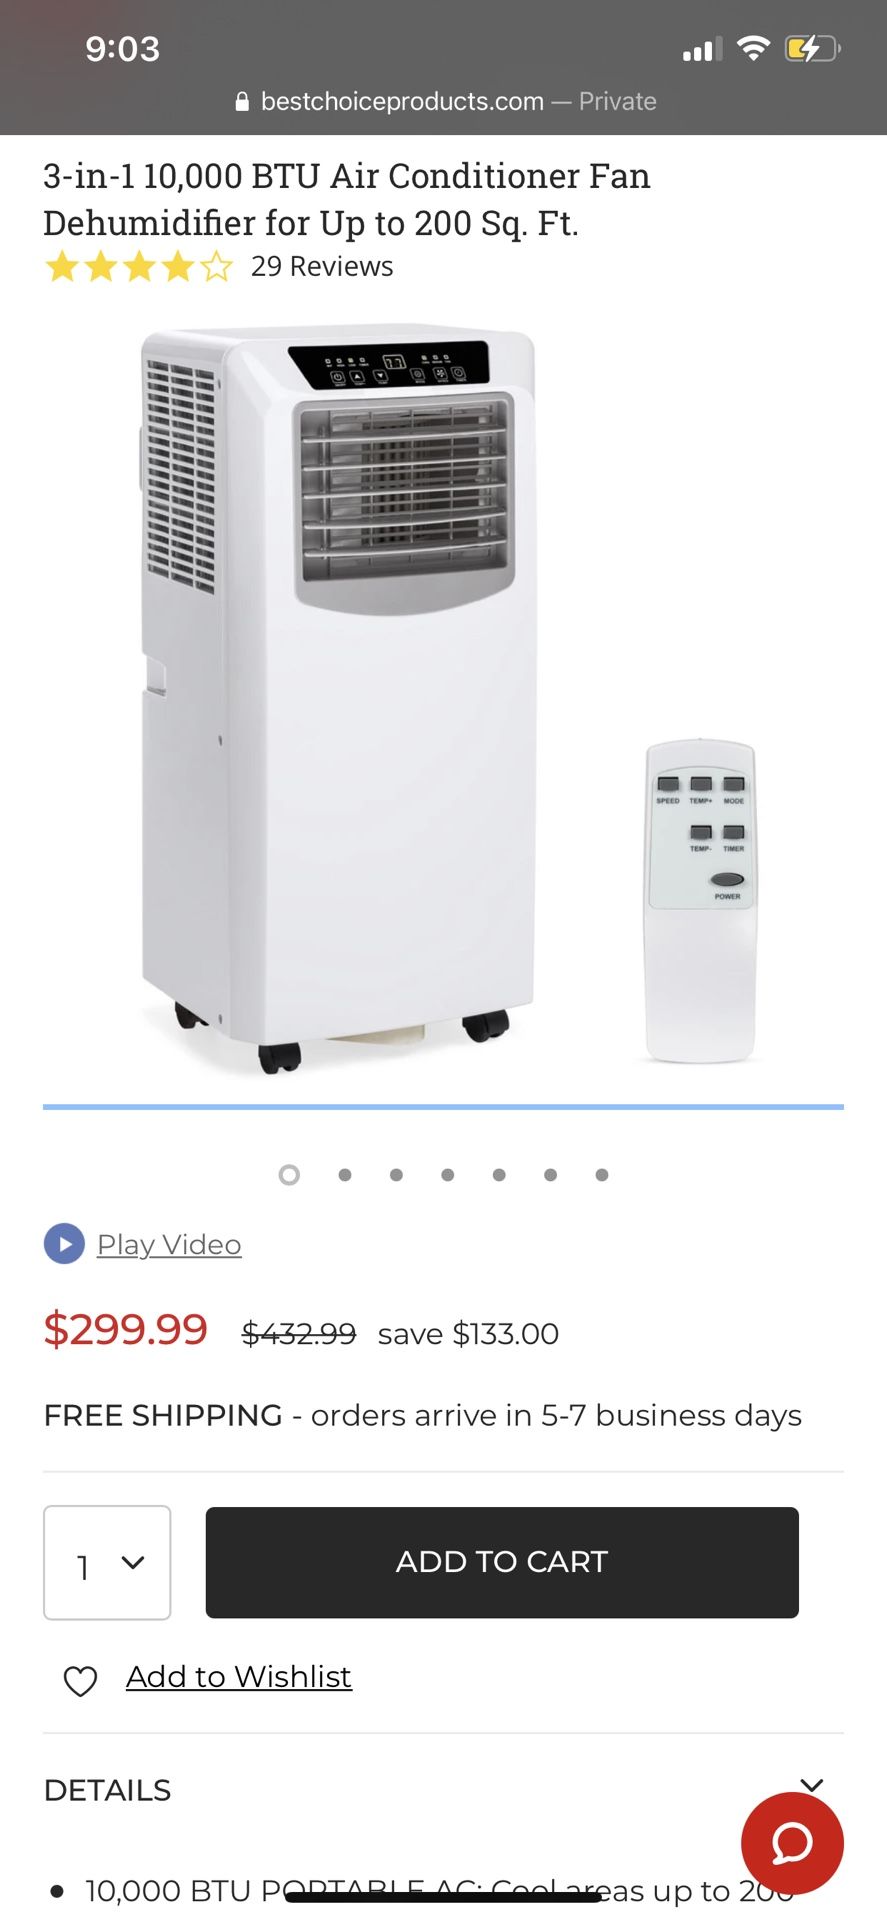 3-in-1 10,000 BTU Air Conditioner Fan Dehumidifier for Up to 200 Sq. Ft.